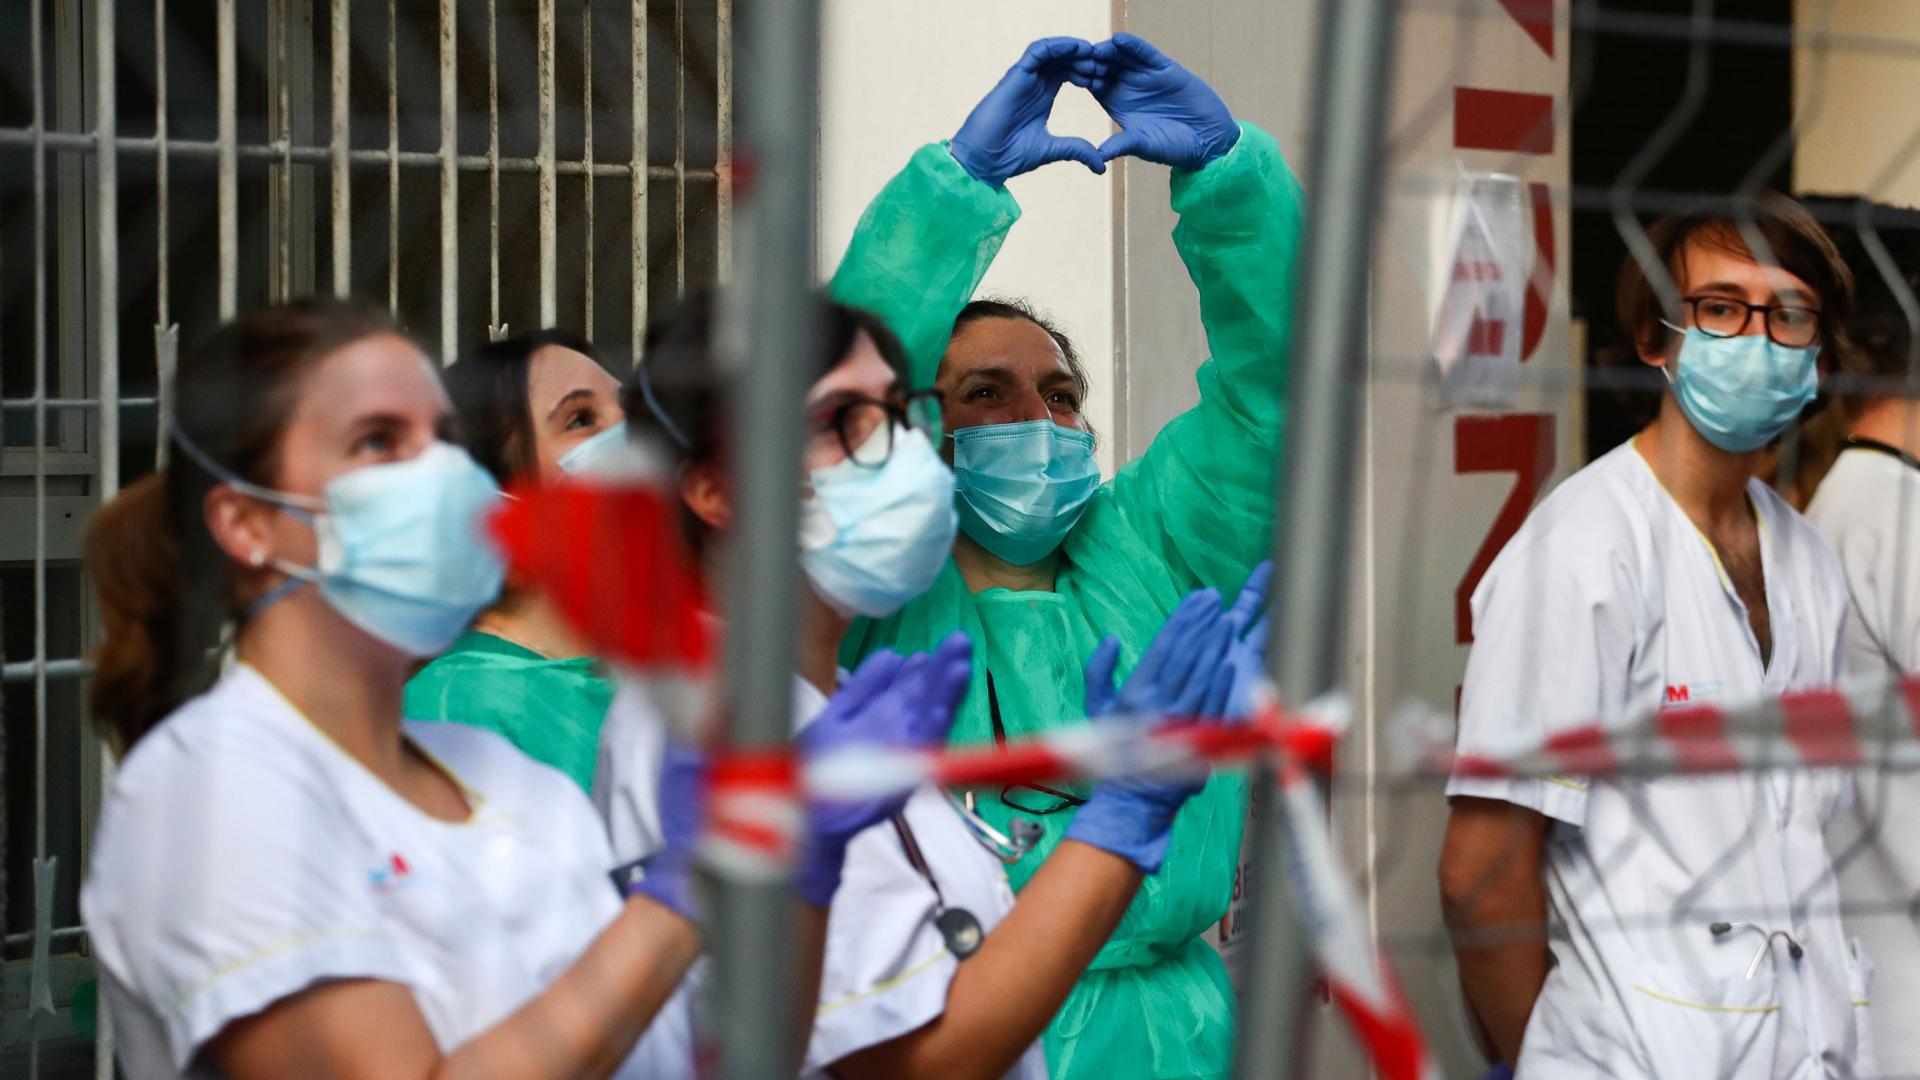 Several health care workers are shown wearing protective suits and one woman making a heart shape with her hands.